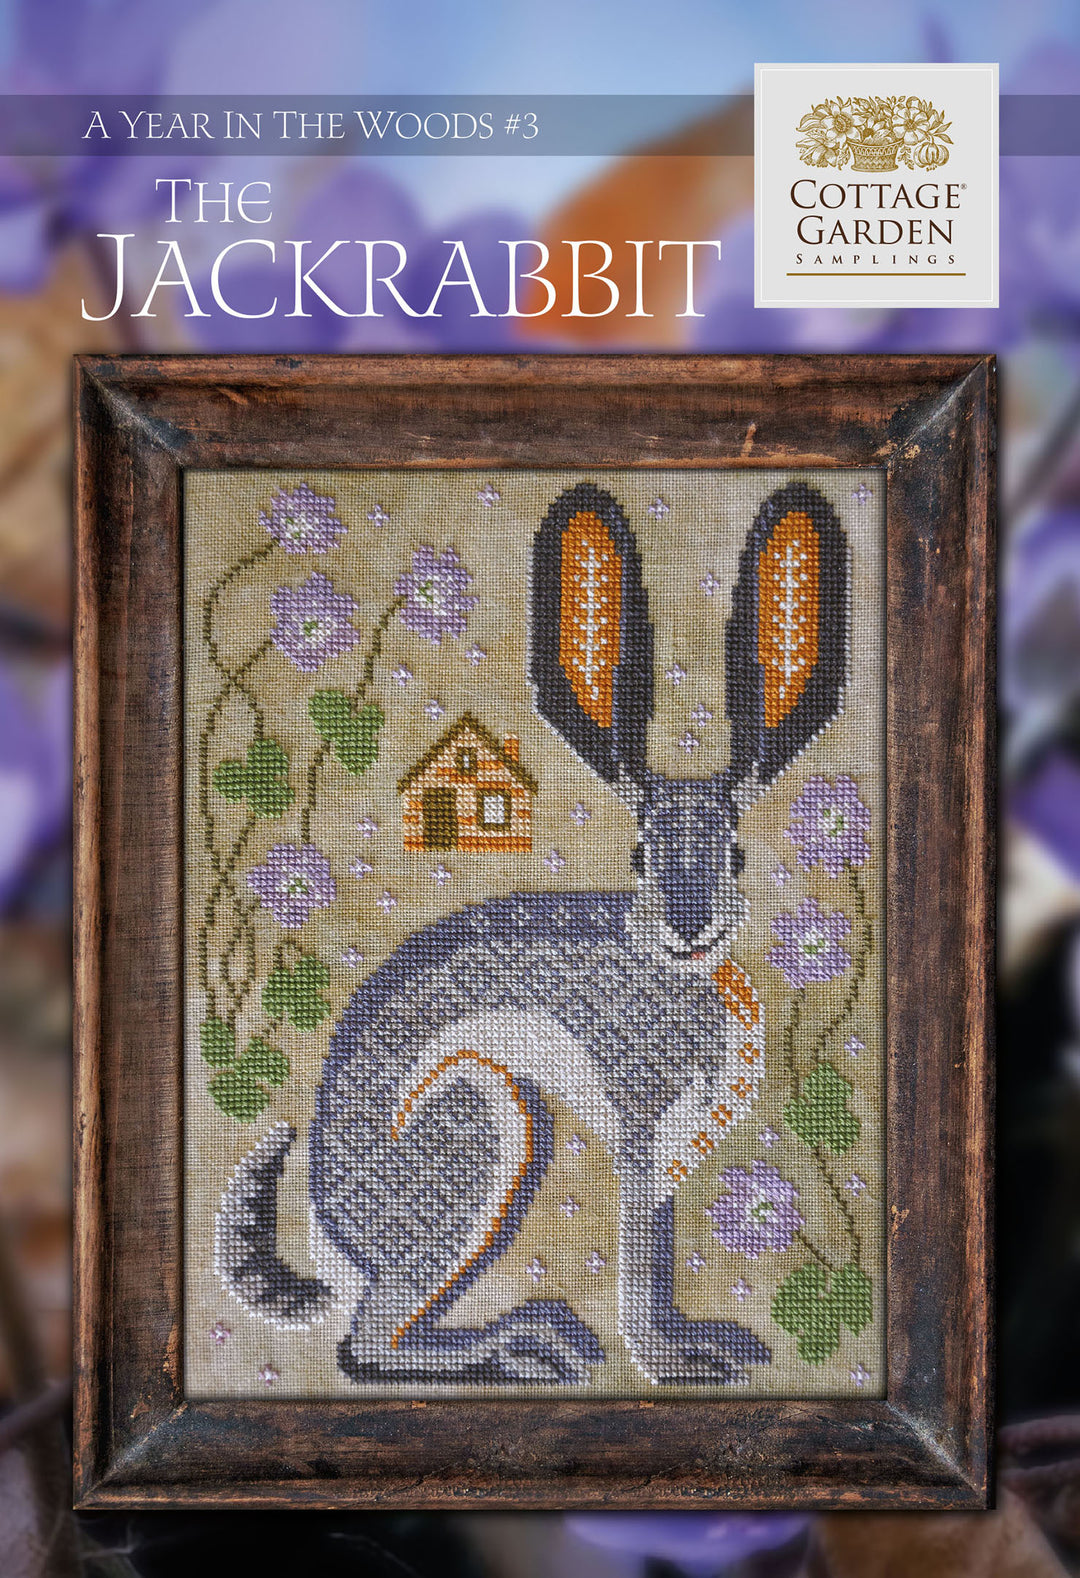 The Jackrabbit, A Year in the Woods #3 | Cottage Garden Samplings